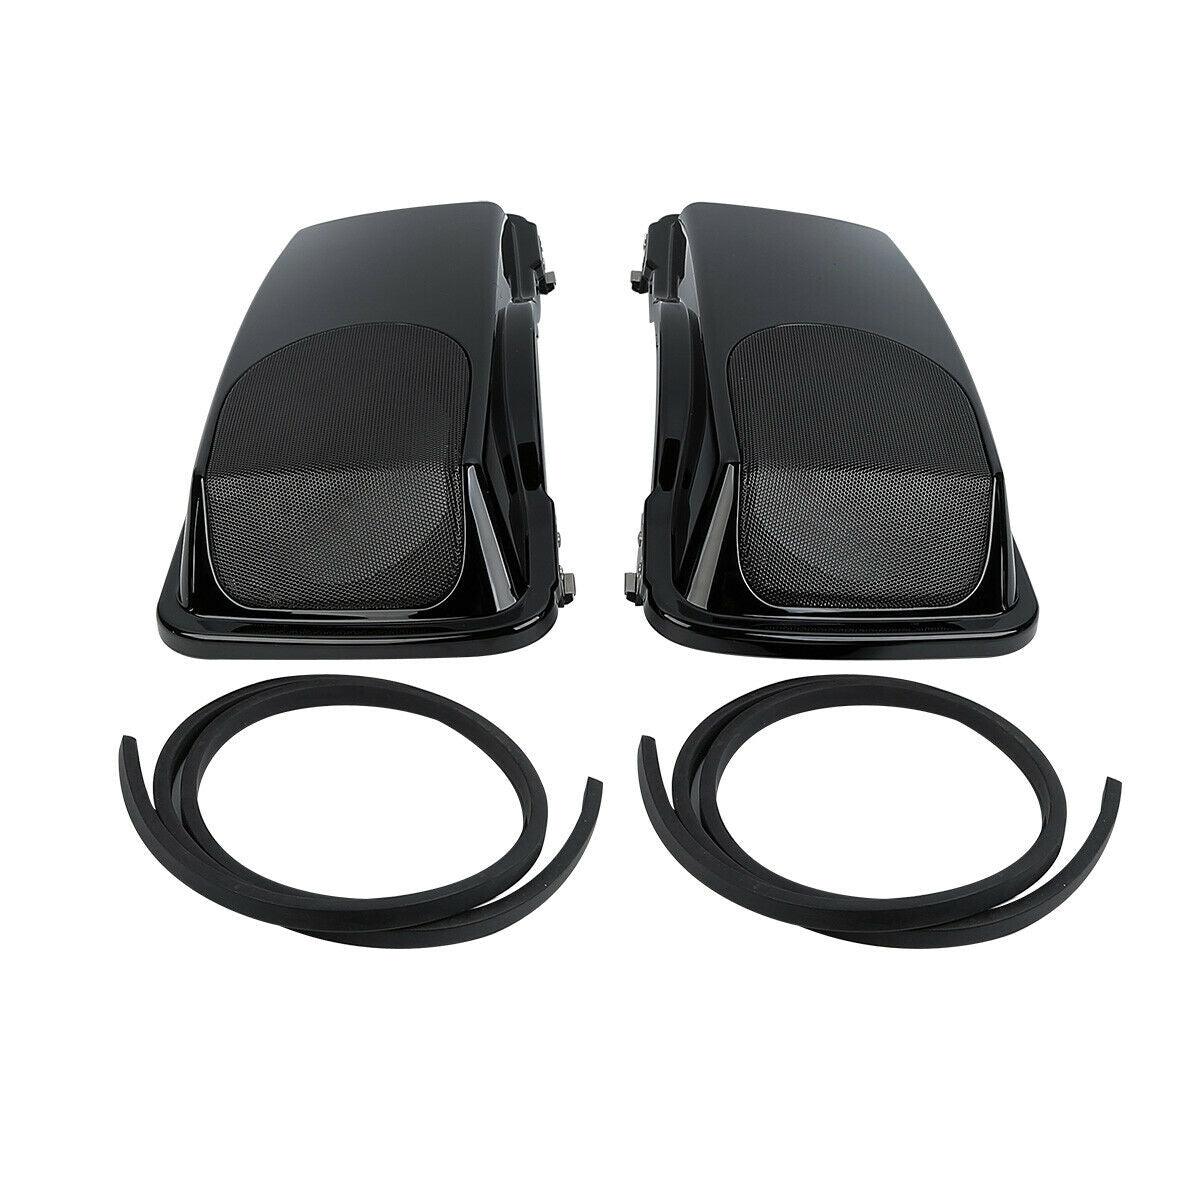 Black Saddlebags Lids & 5x7''Speakers Fit For Harley Touring Road Glide 93-13 11 - Moto Life Products